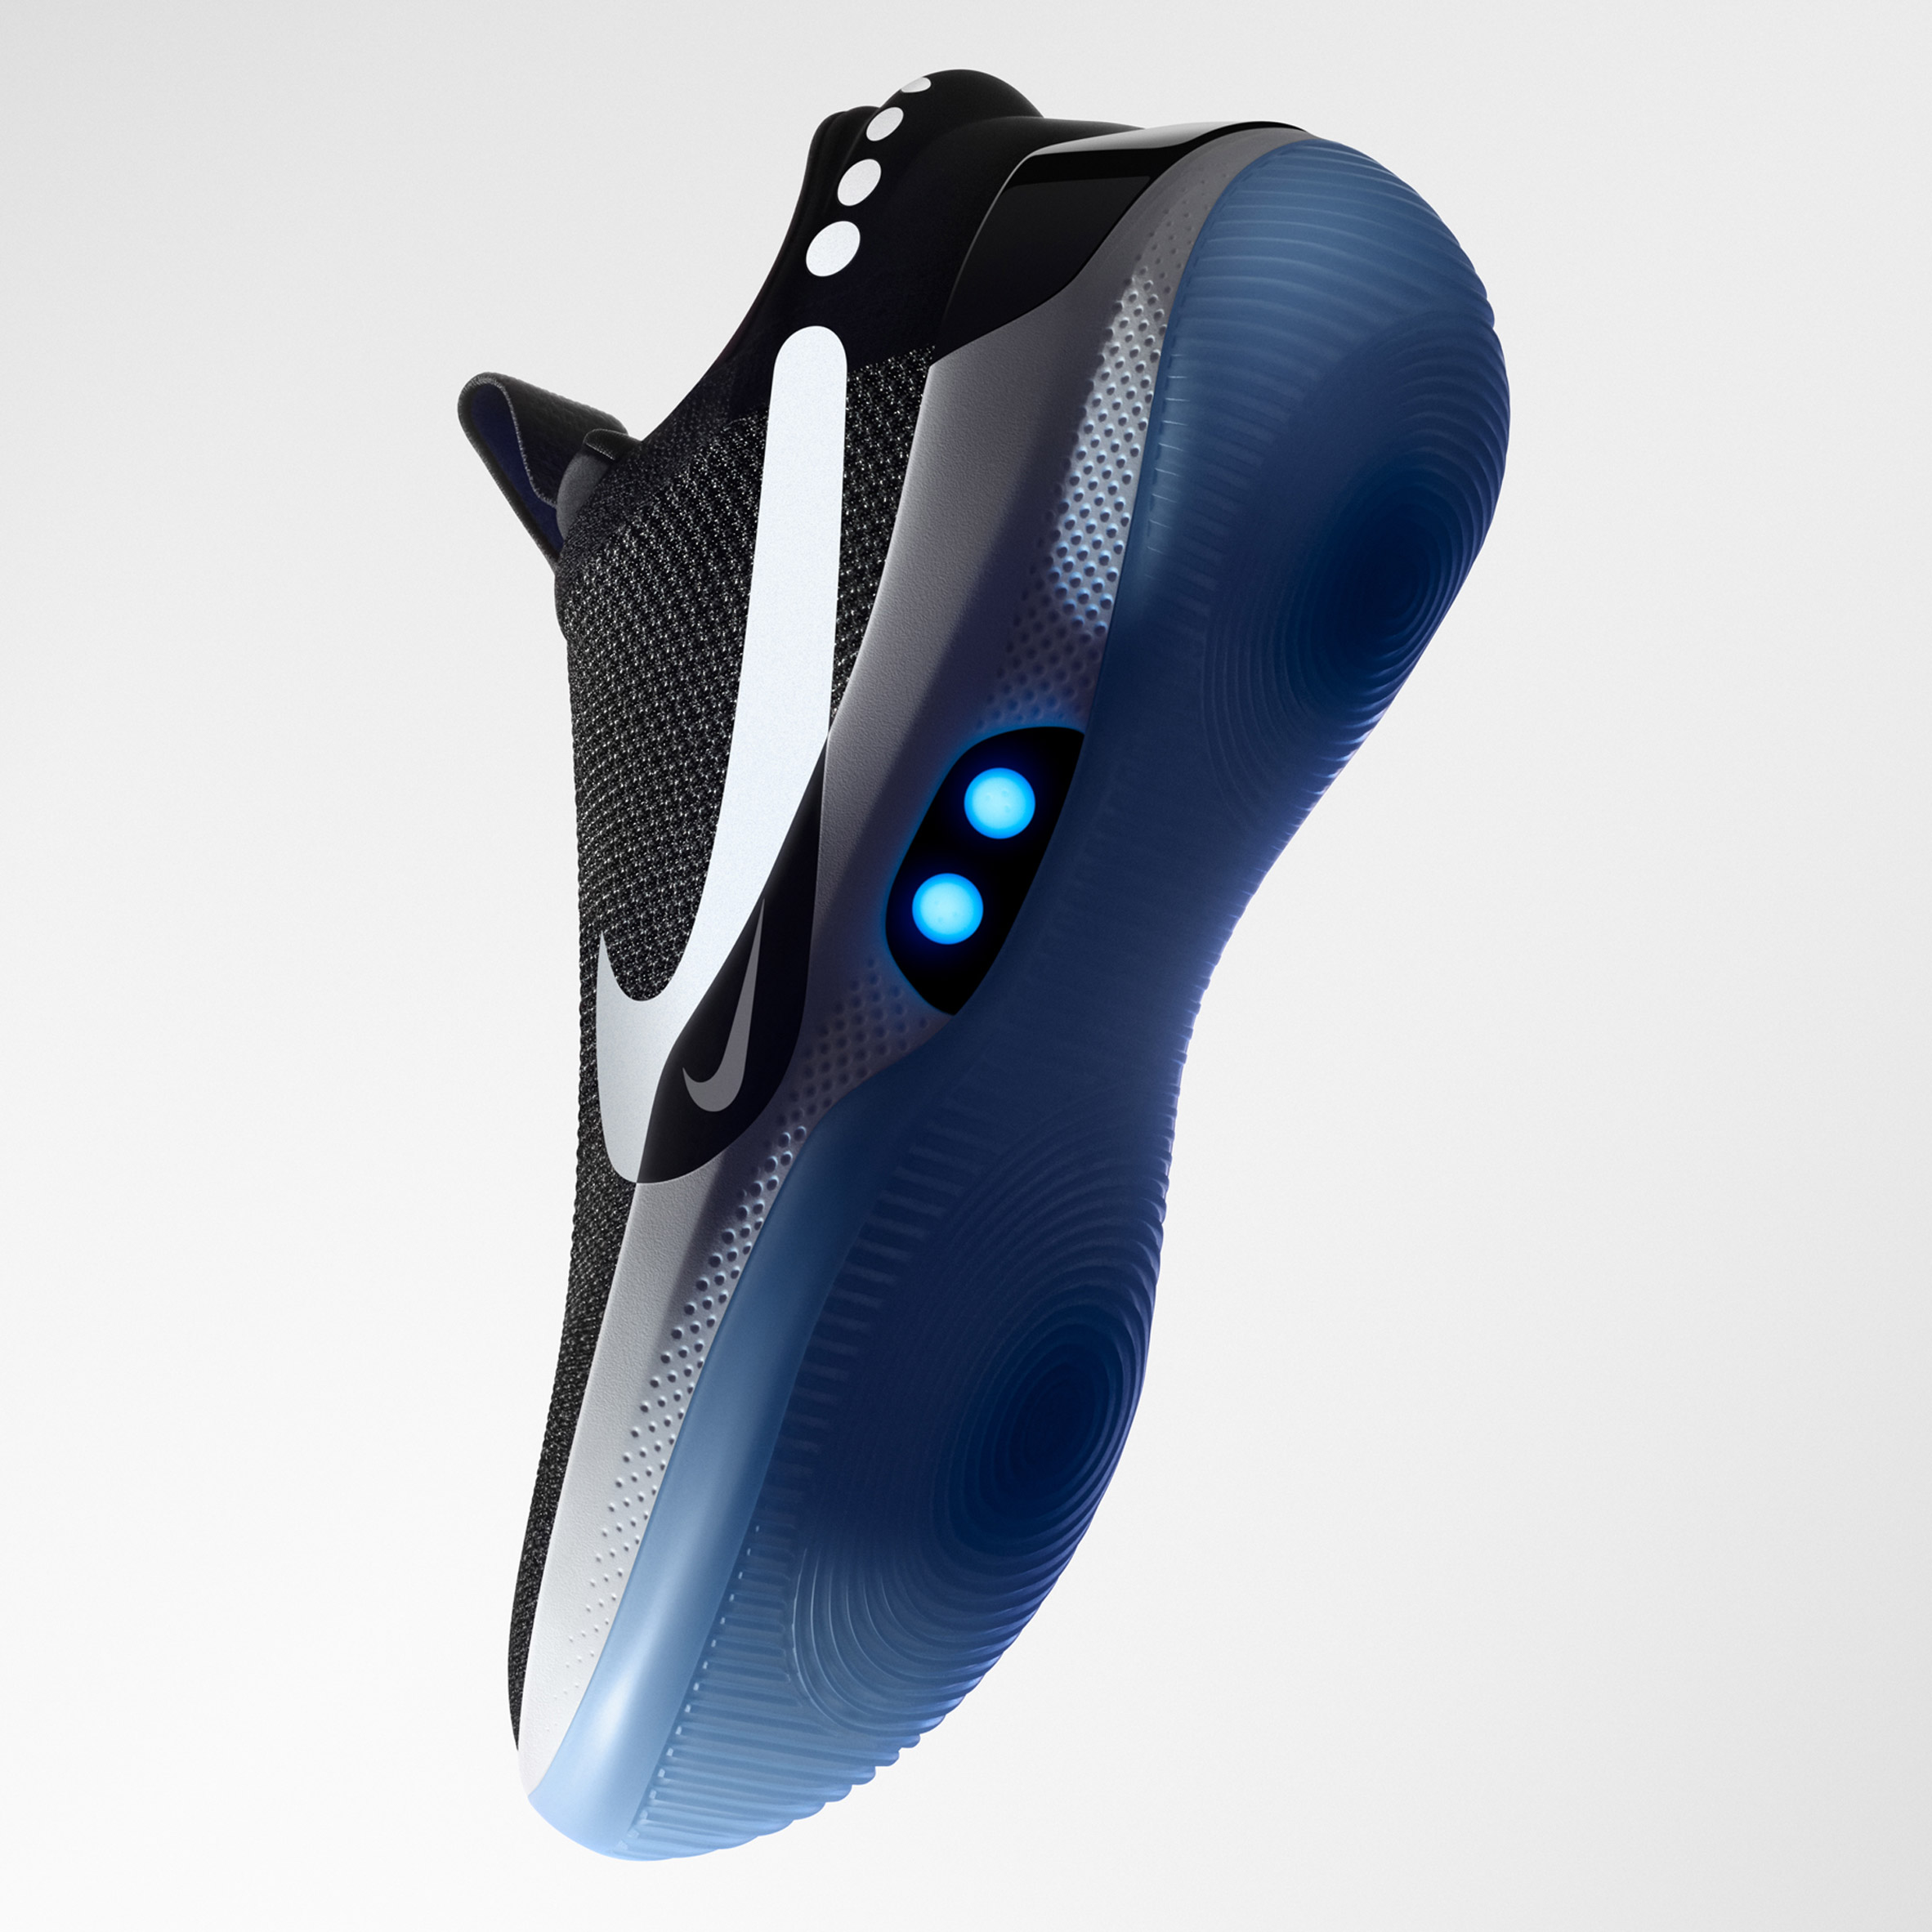 Nike Adapt BB smart basketball sneakers feature technology